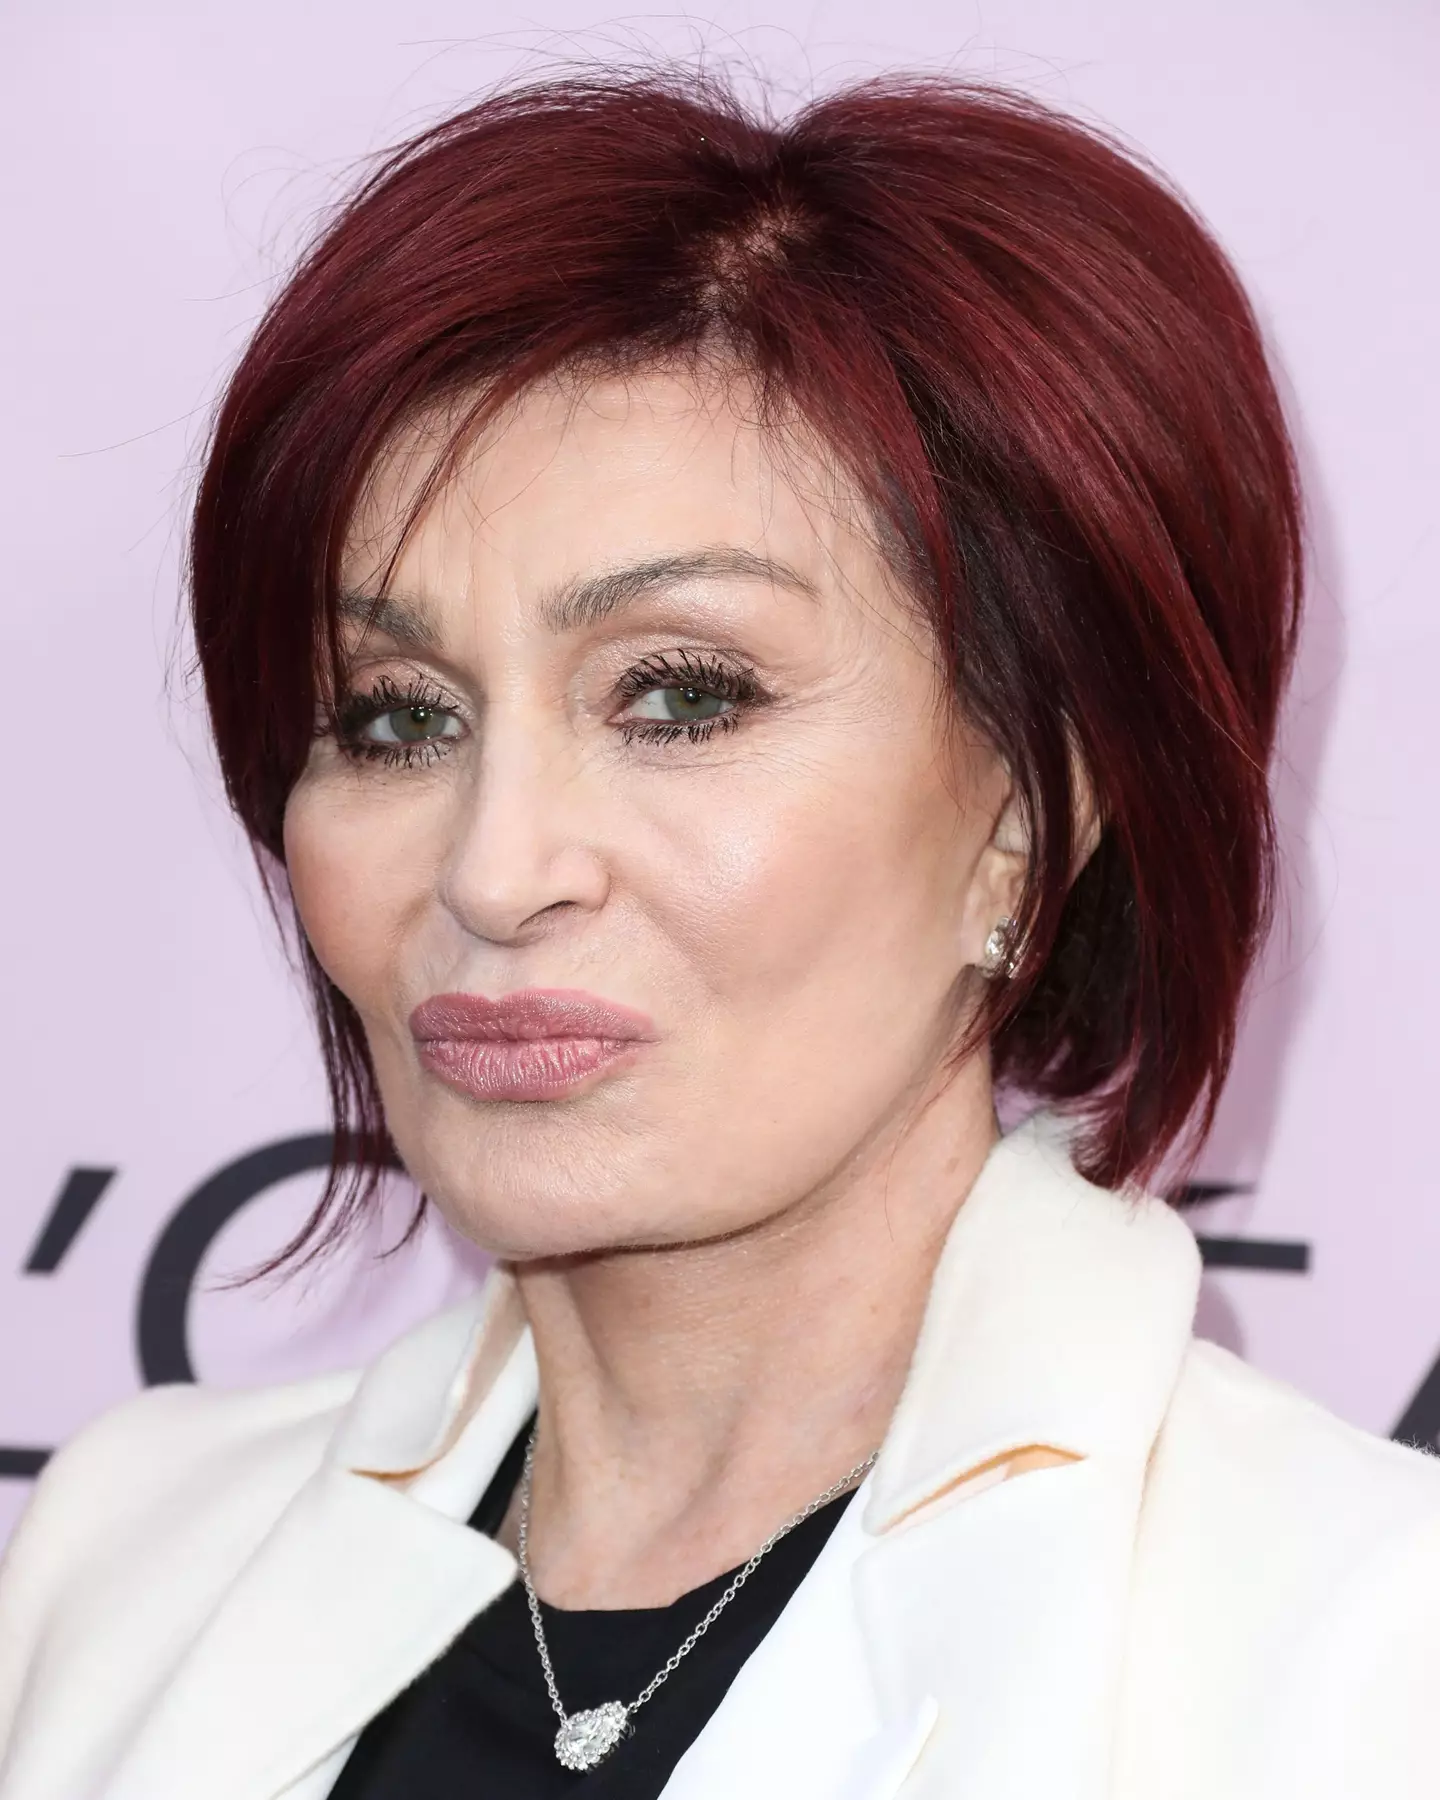 Sharon Osbourne has been open about her own cosmetic procedures in the past.